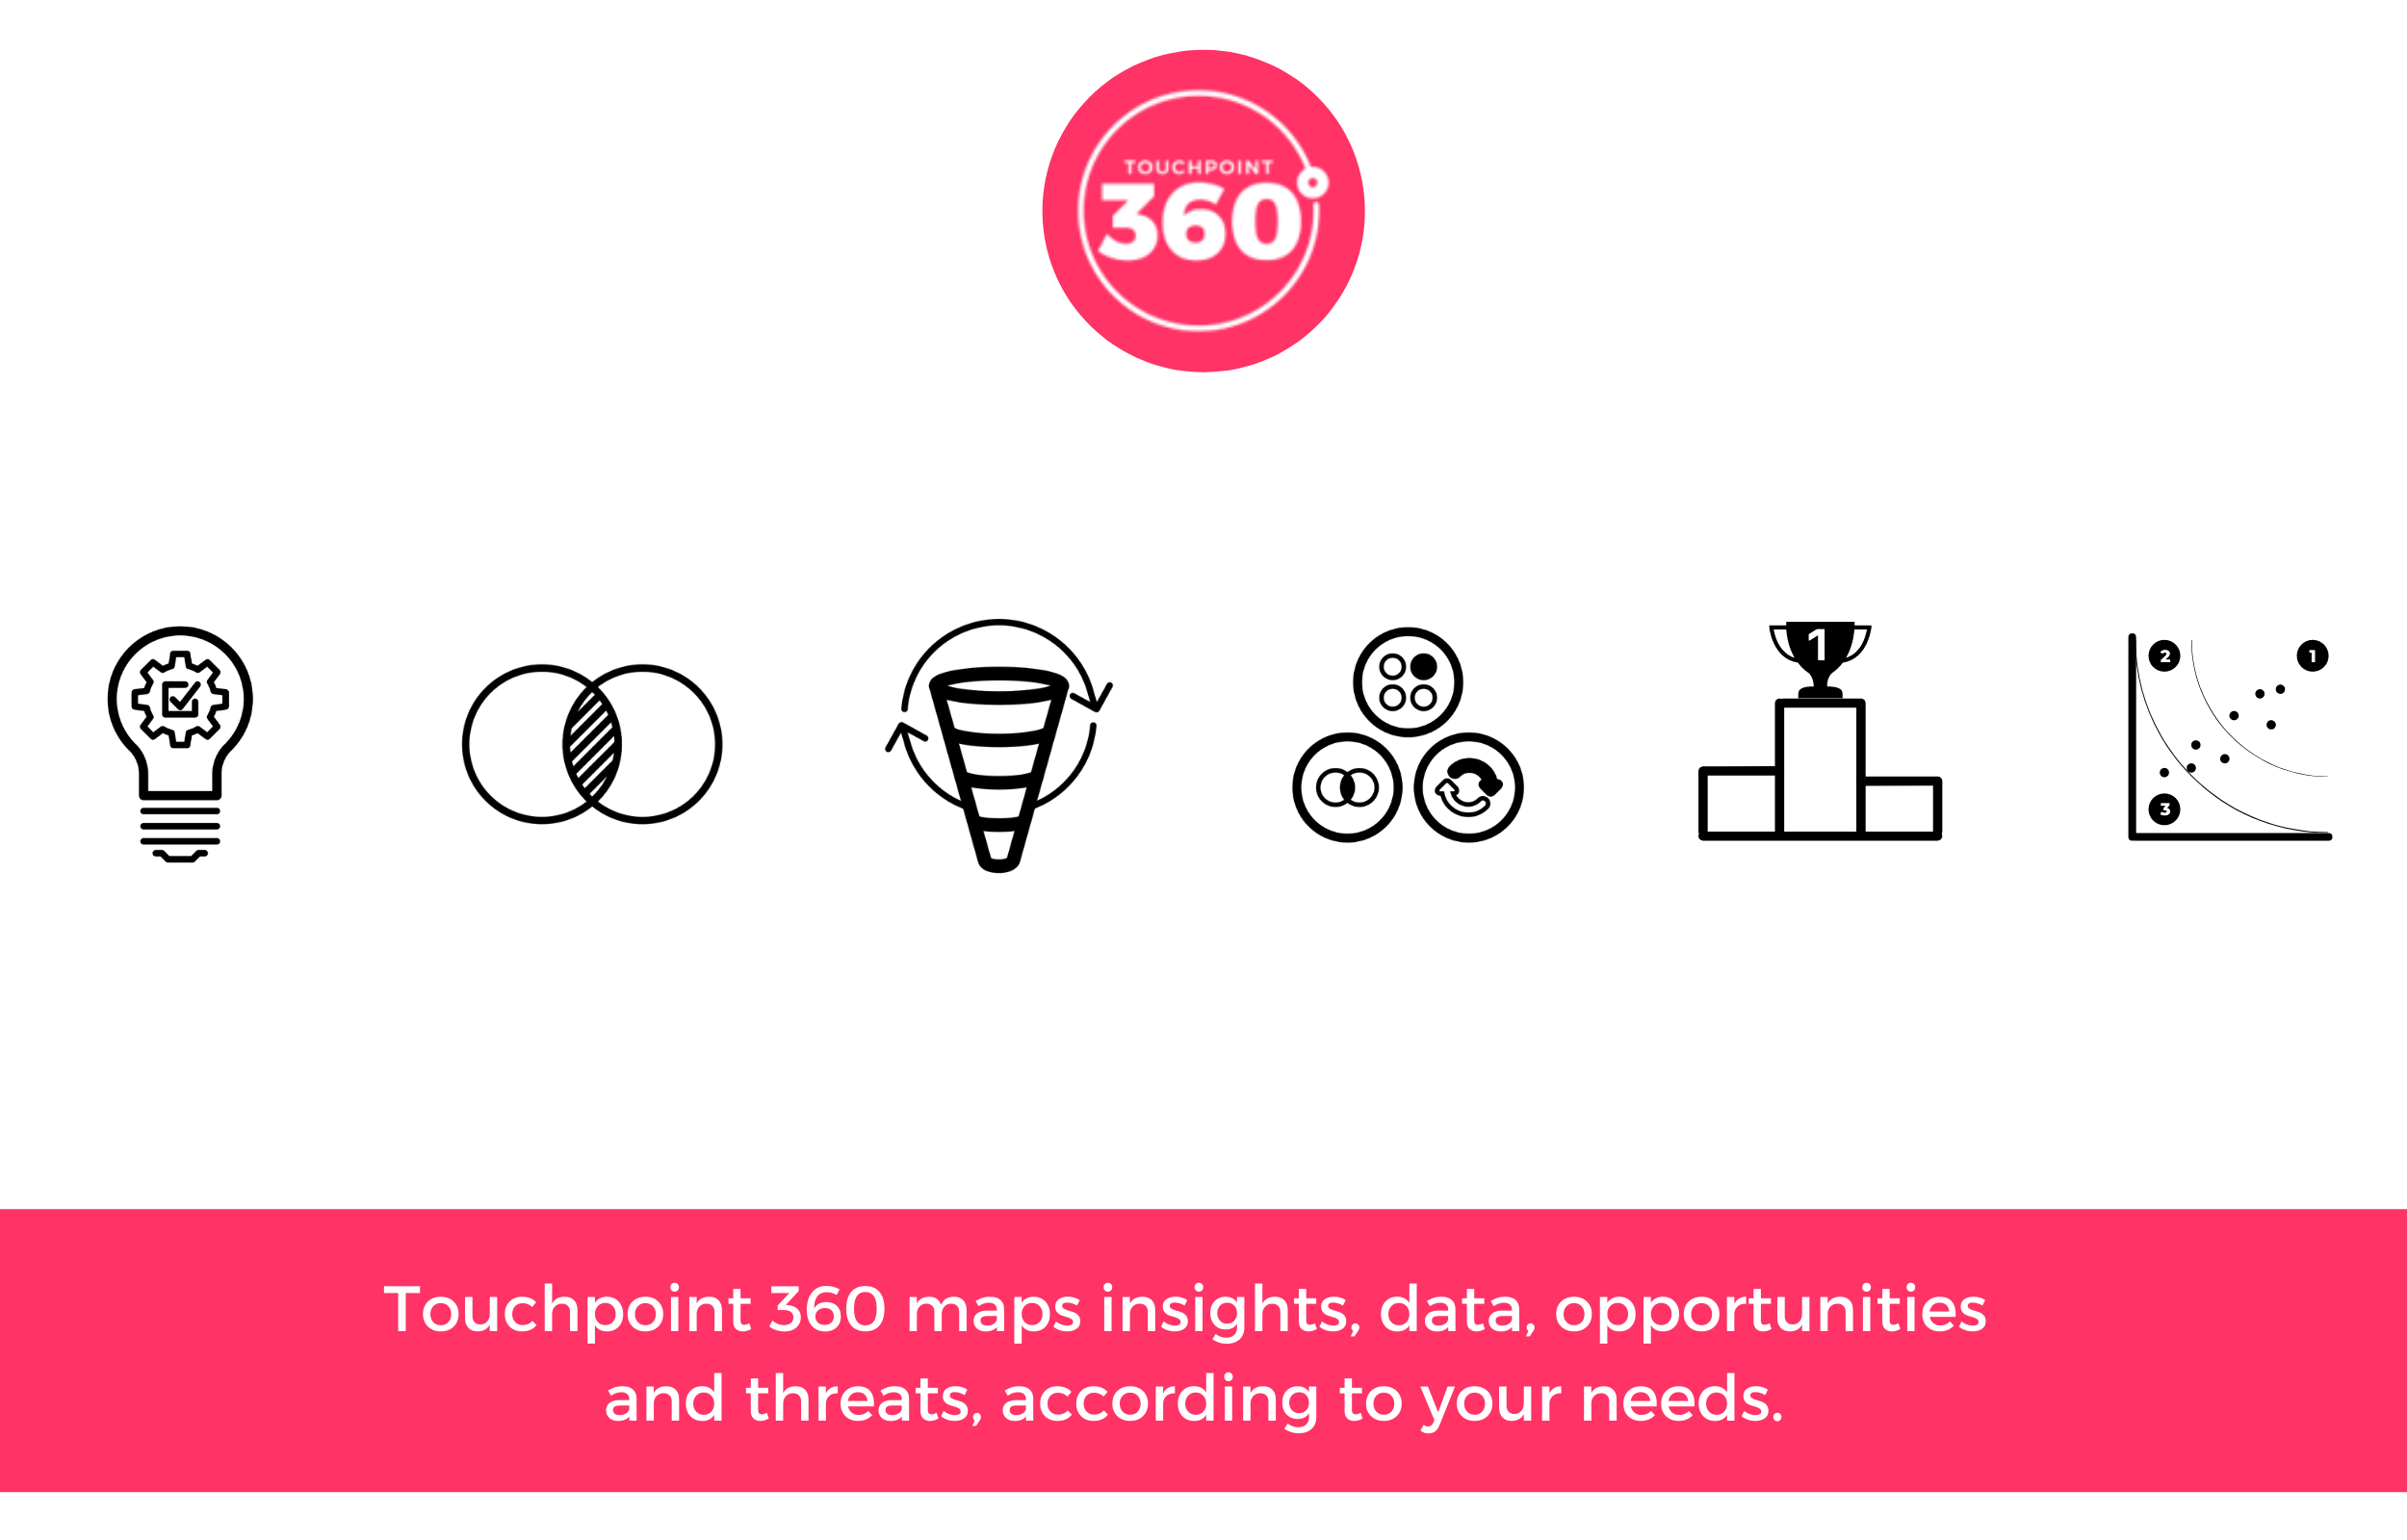 GrowthOps Touchpoint 360 Framework (2)